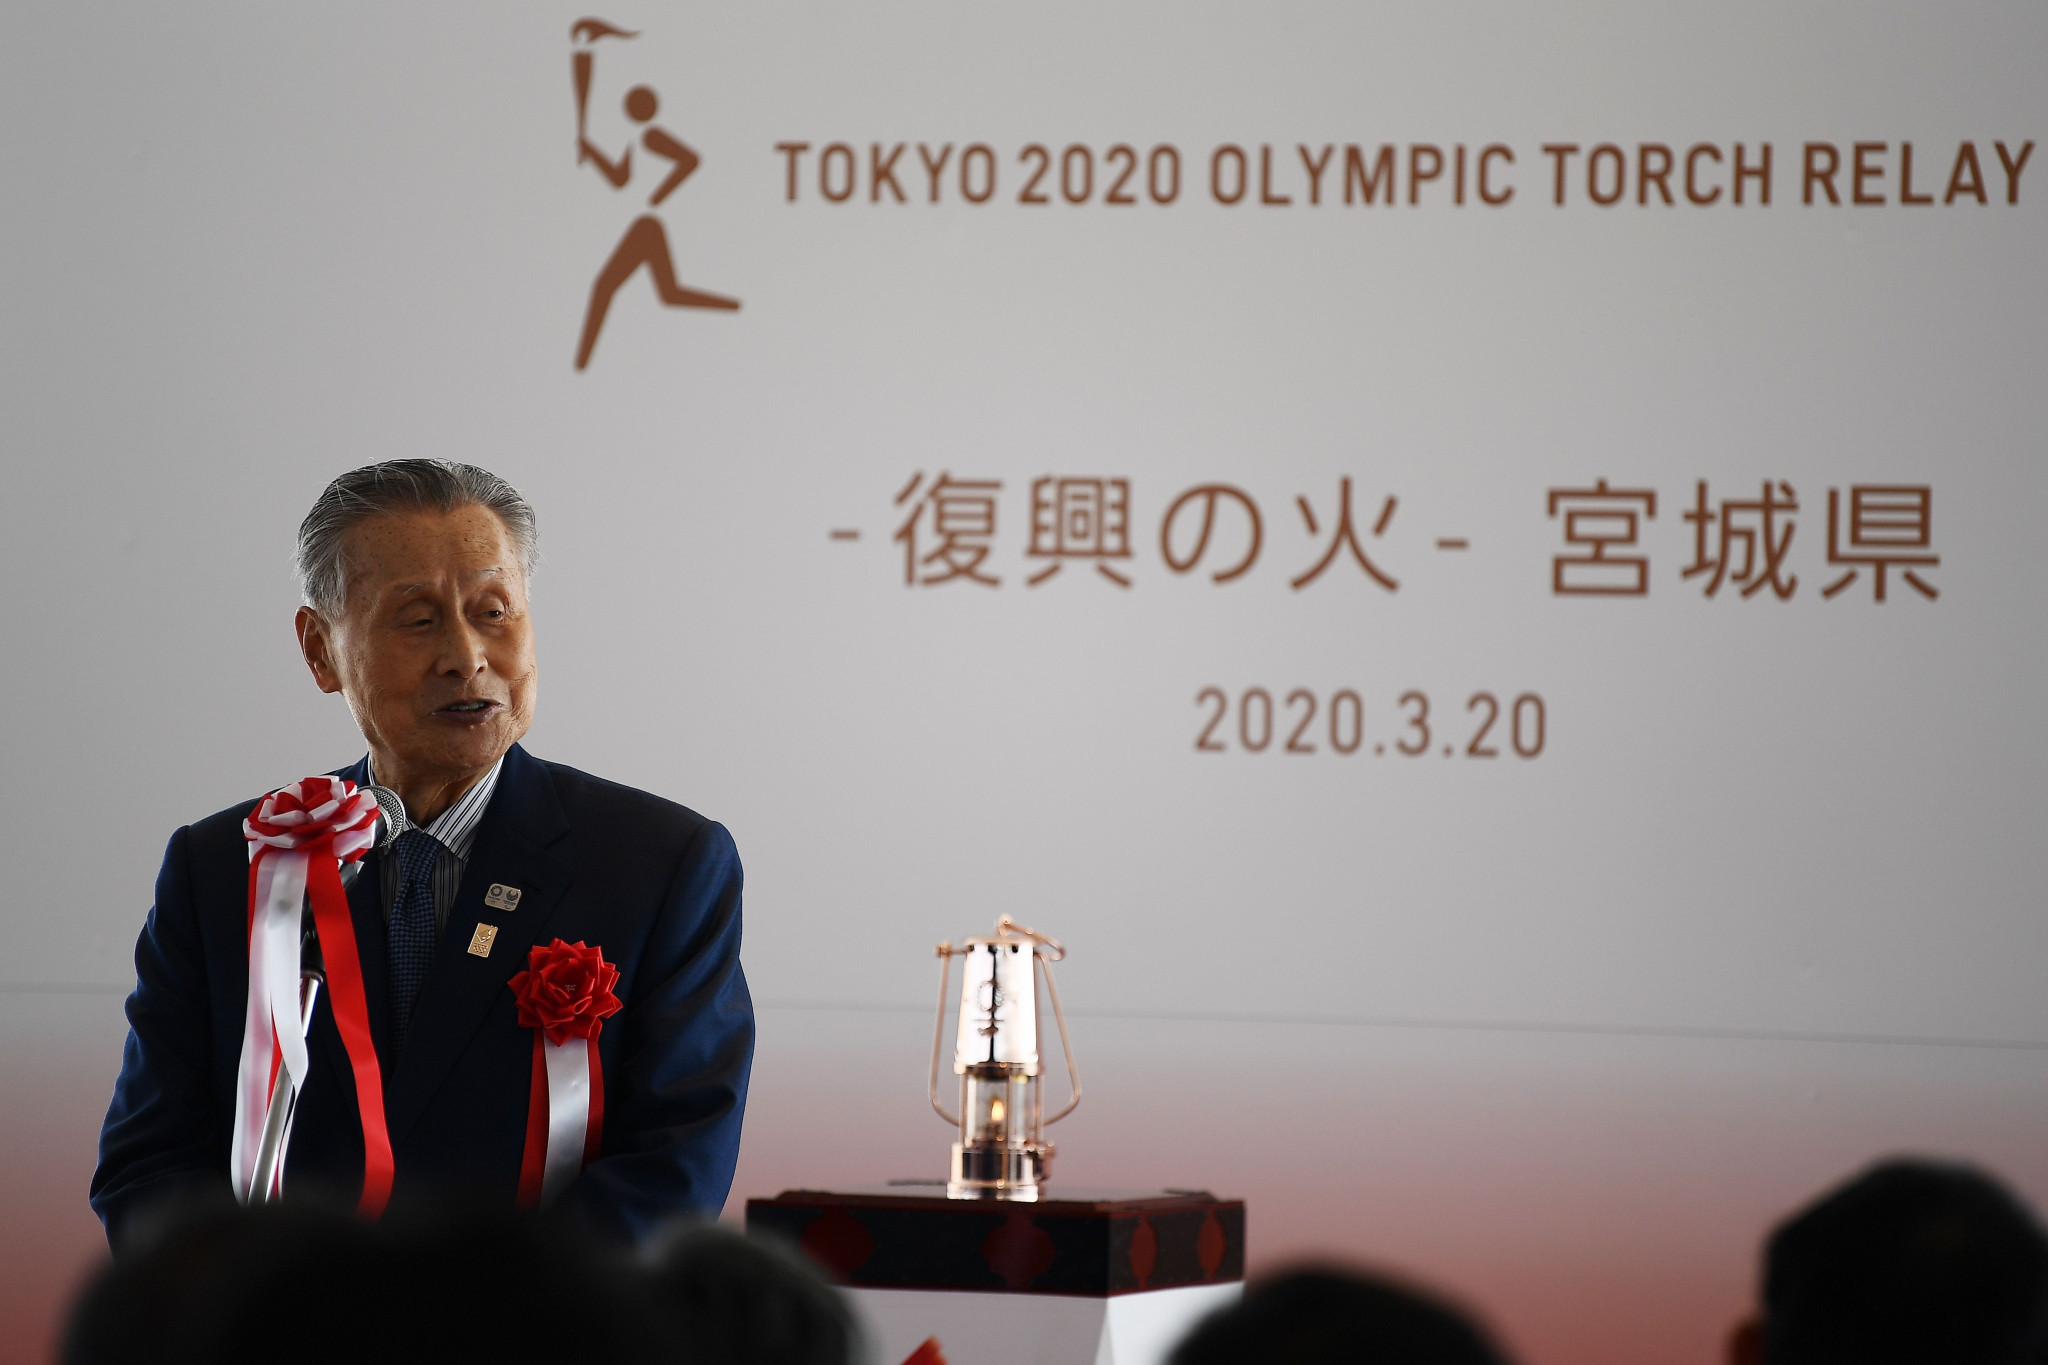 A postponement should only be announced when the IOC and Tokyo 2020 can confirm plans ©Getty Images